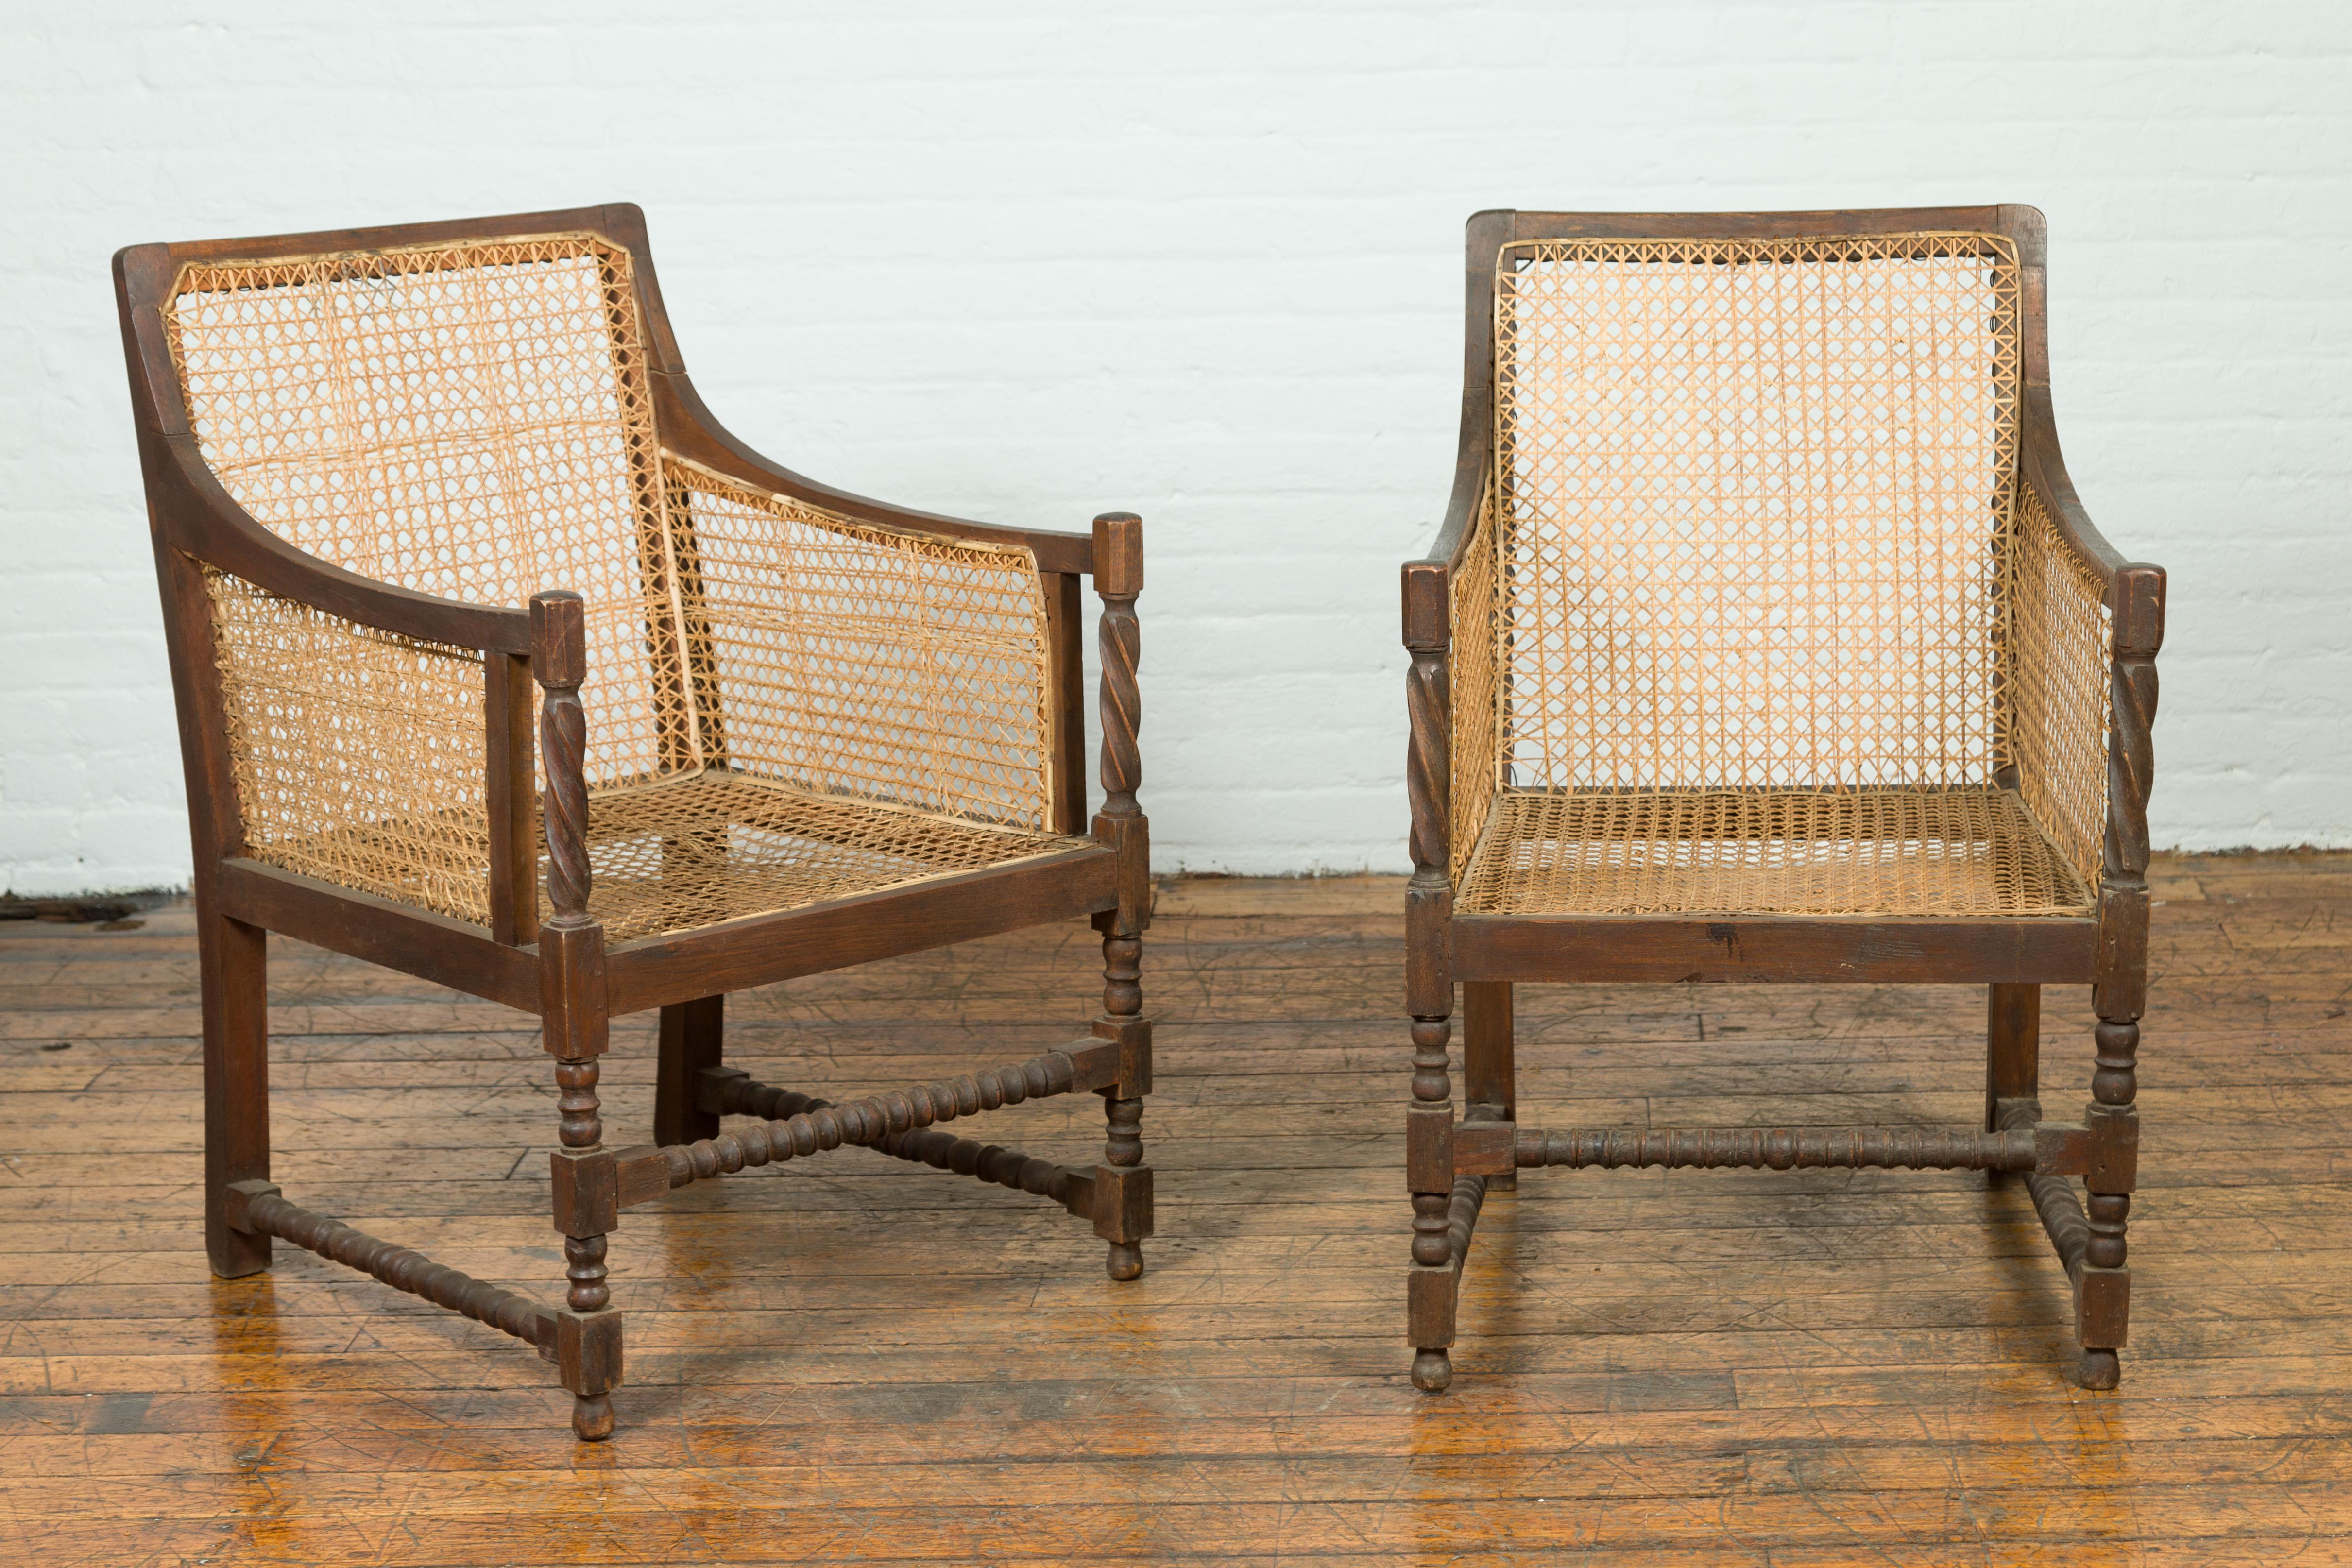 A pair of antique Thai armchairs from the 19th century, with rattan seats and backs. Created in Thailand during the 19th century, this pair of armchairs charms us with its rustic presence. Showcasing rattan backs and seats, the chairs are adorned